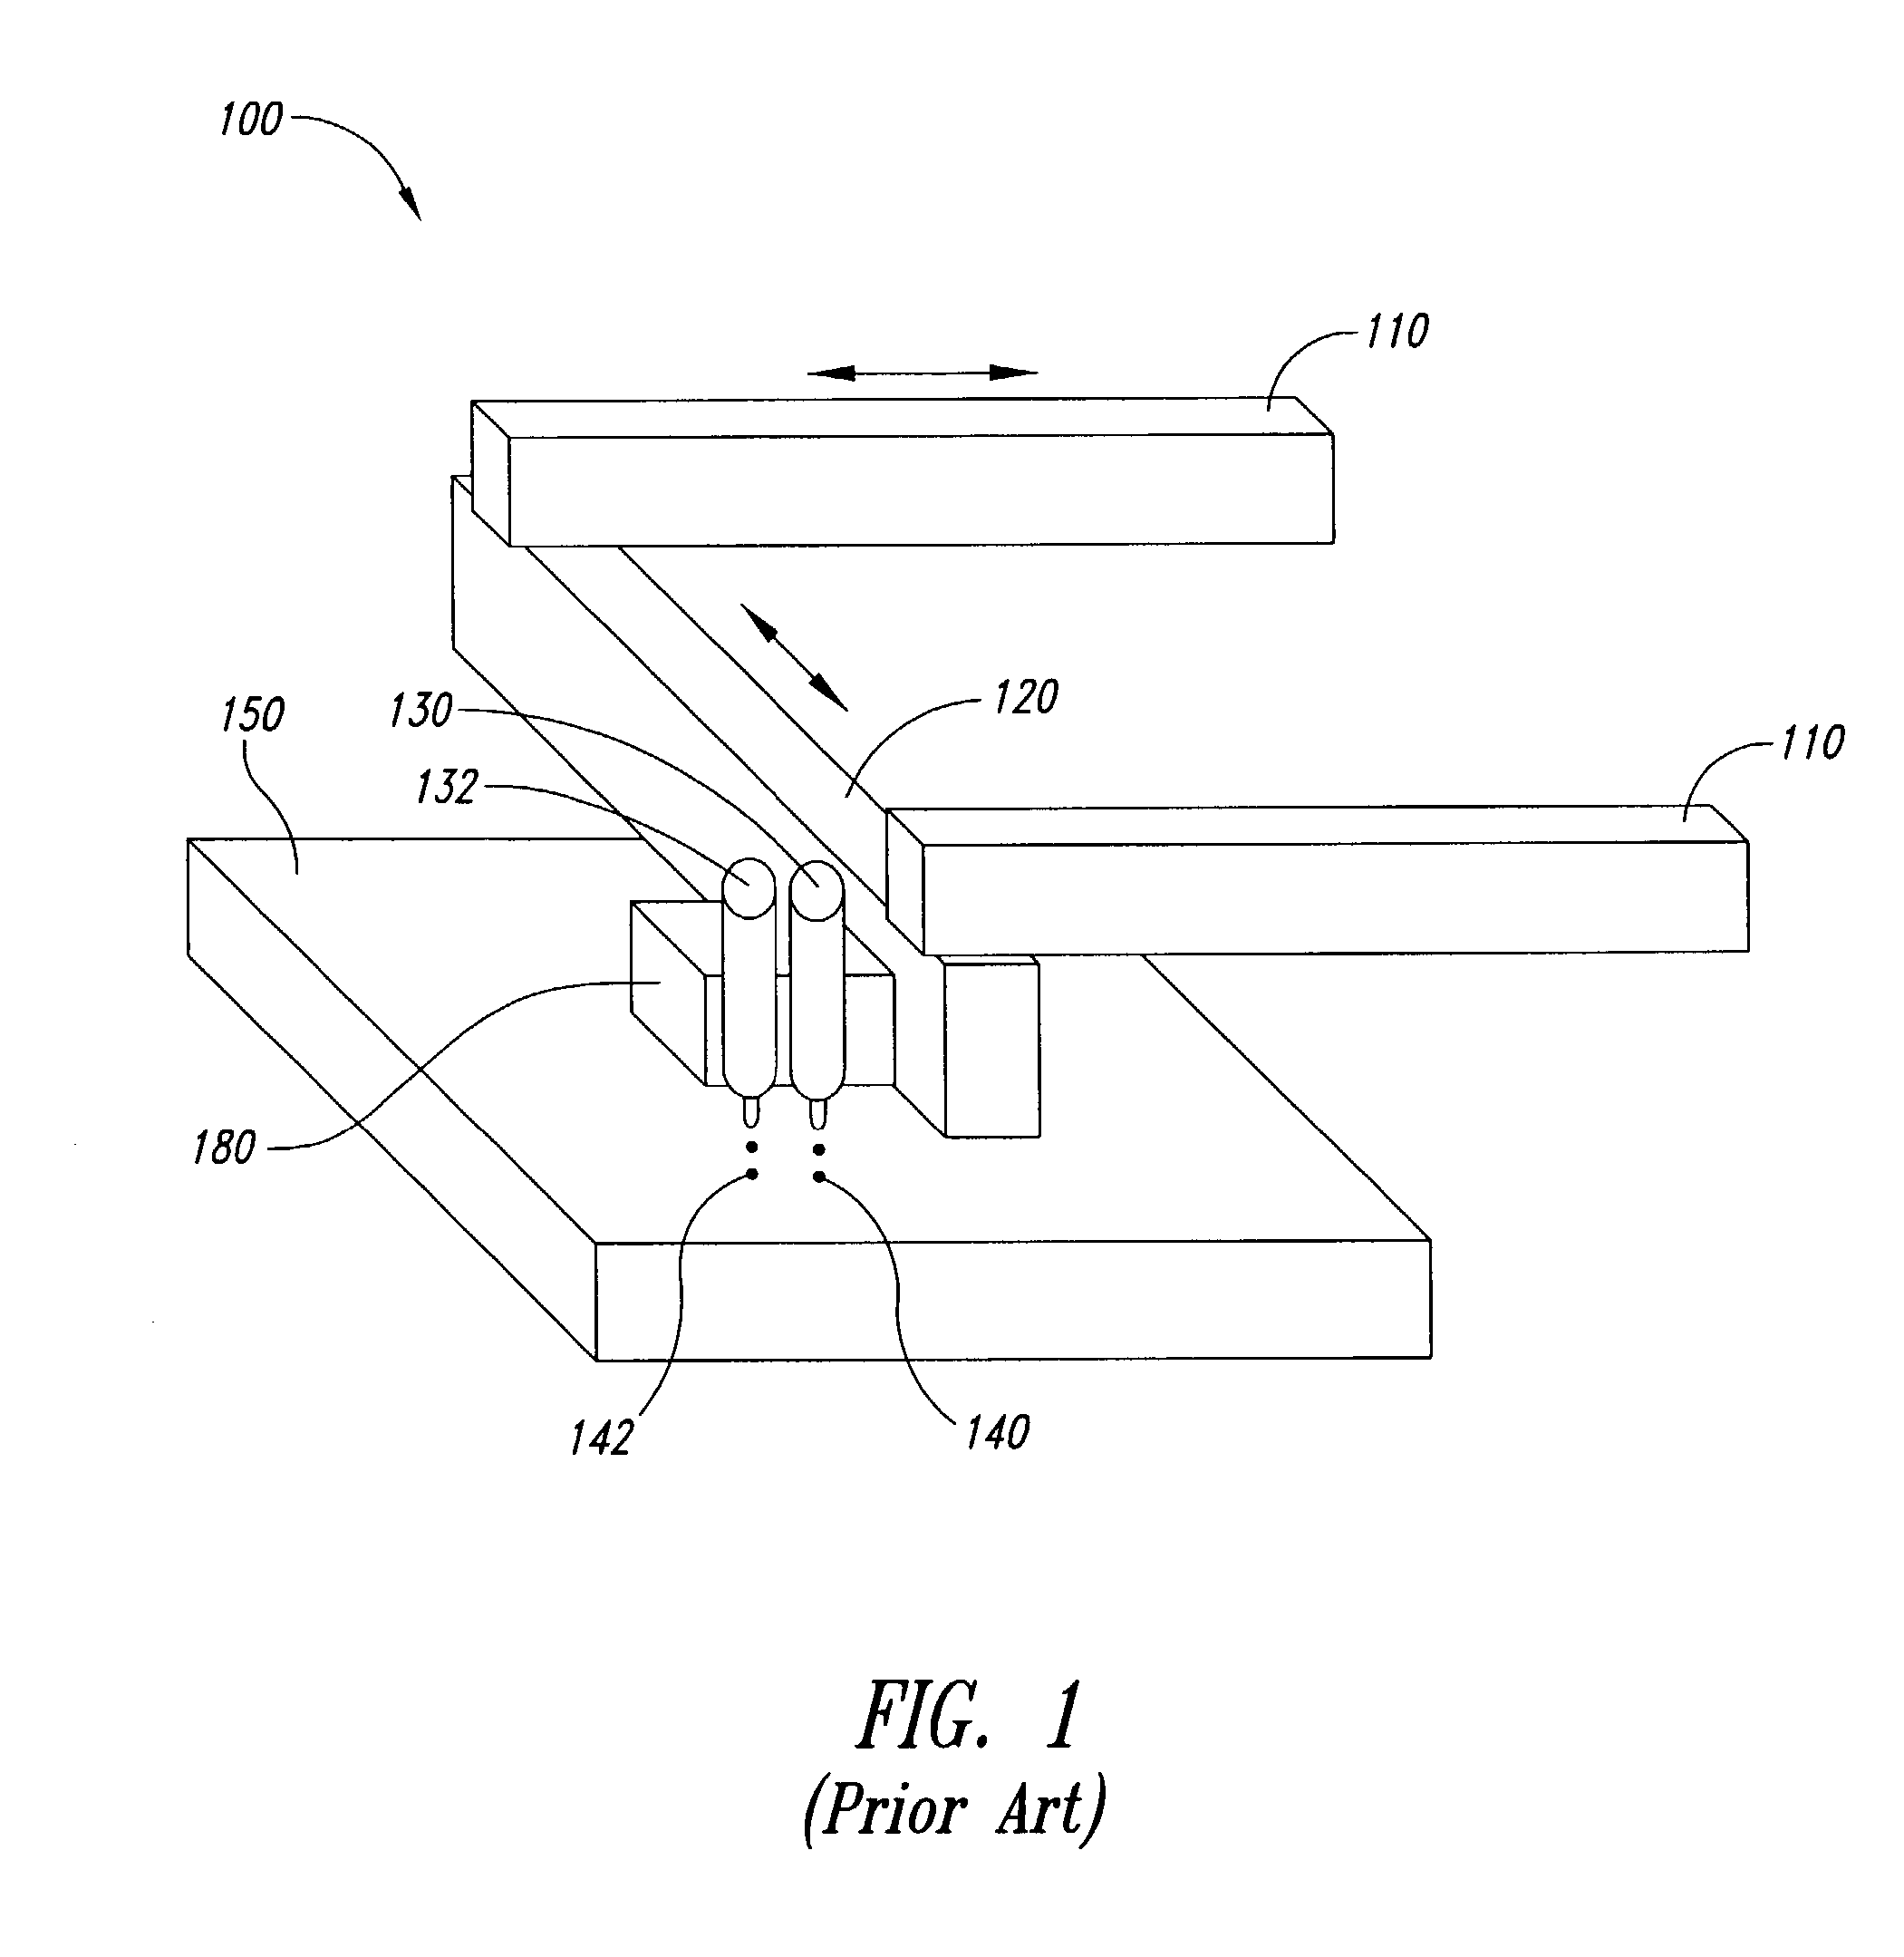 System and method for uniaxial compression of an article, such as a three-dimensionally printed dosage form